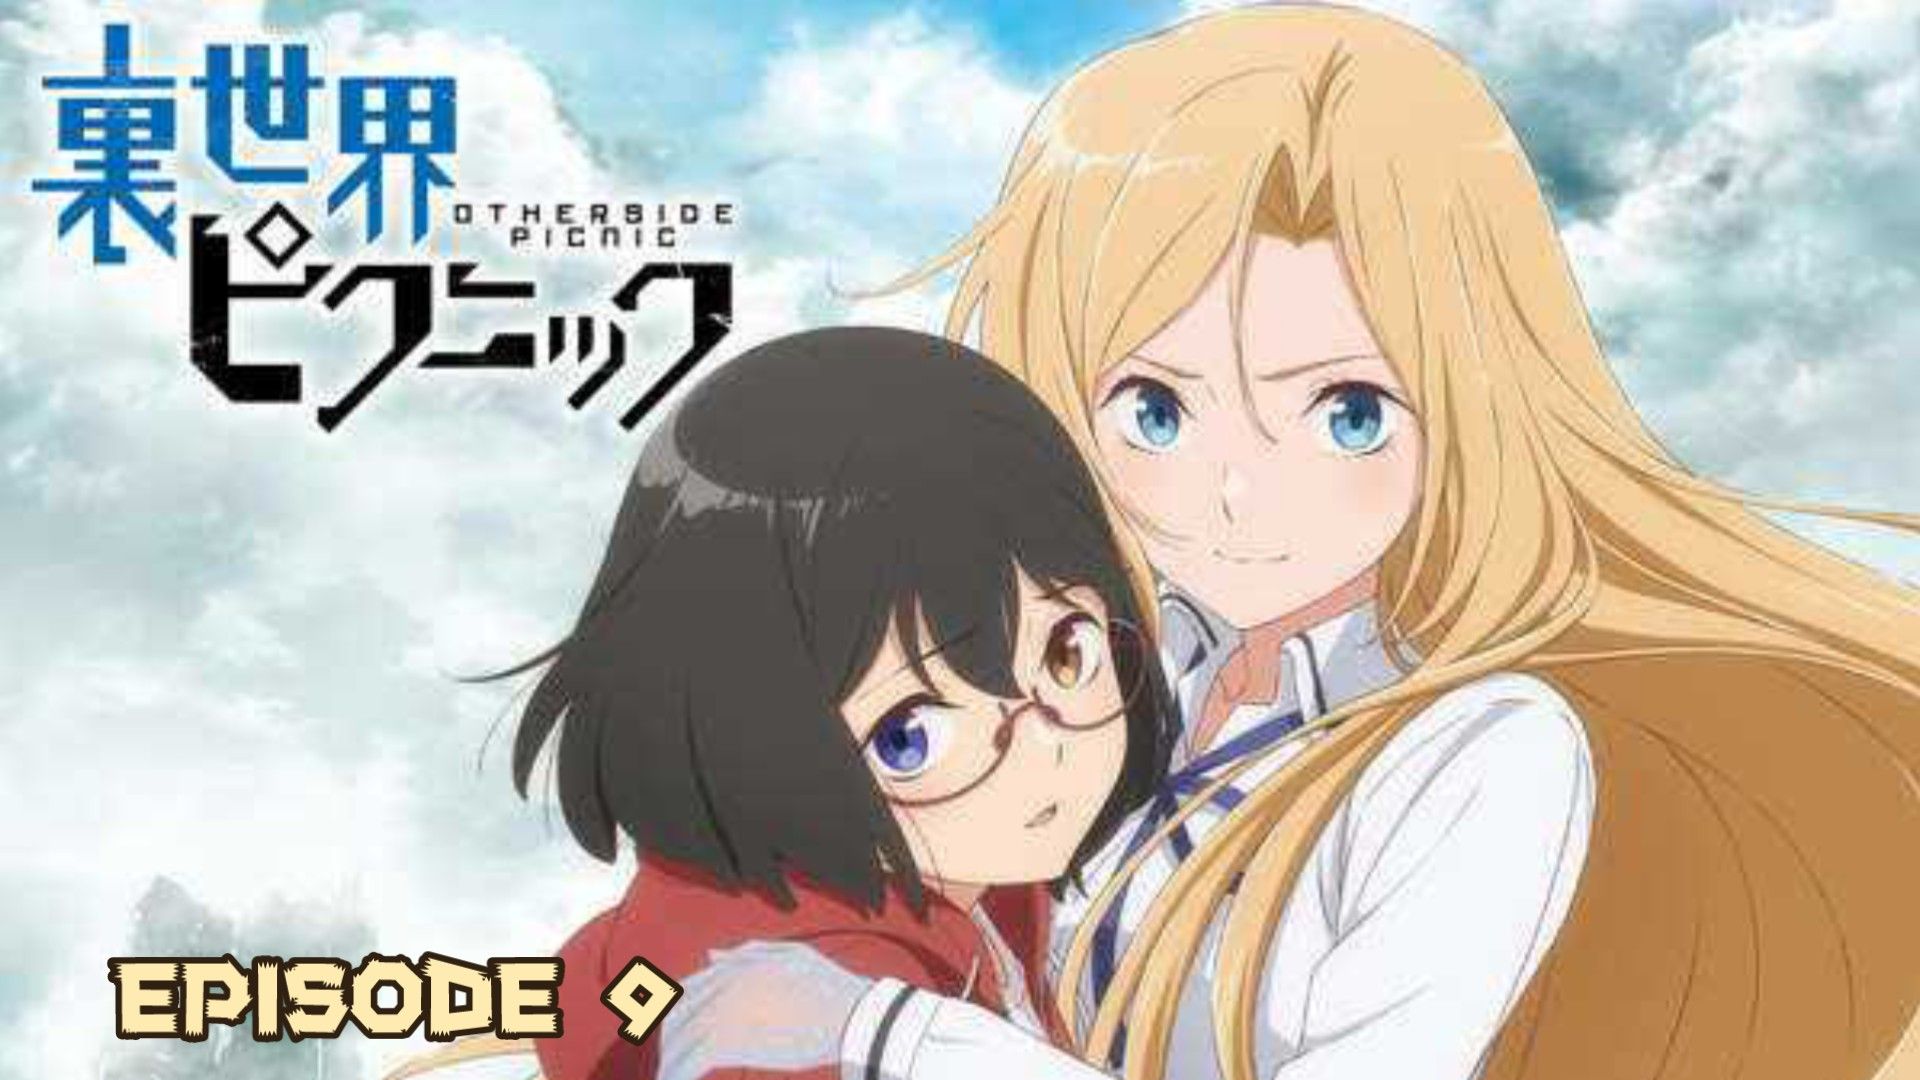 Otherside Picnic Episode 9 - Toothache - I drink and watch anime